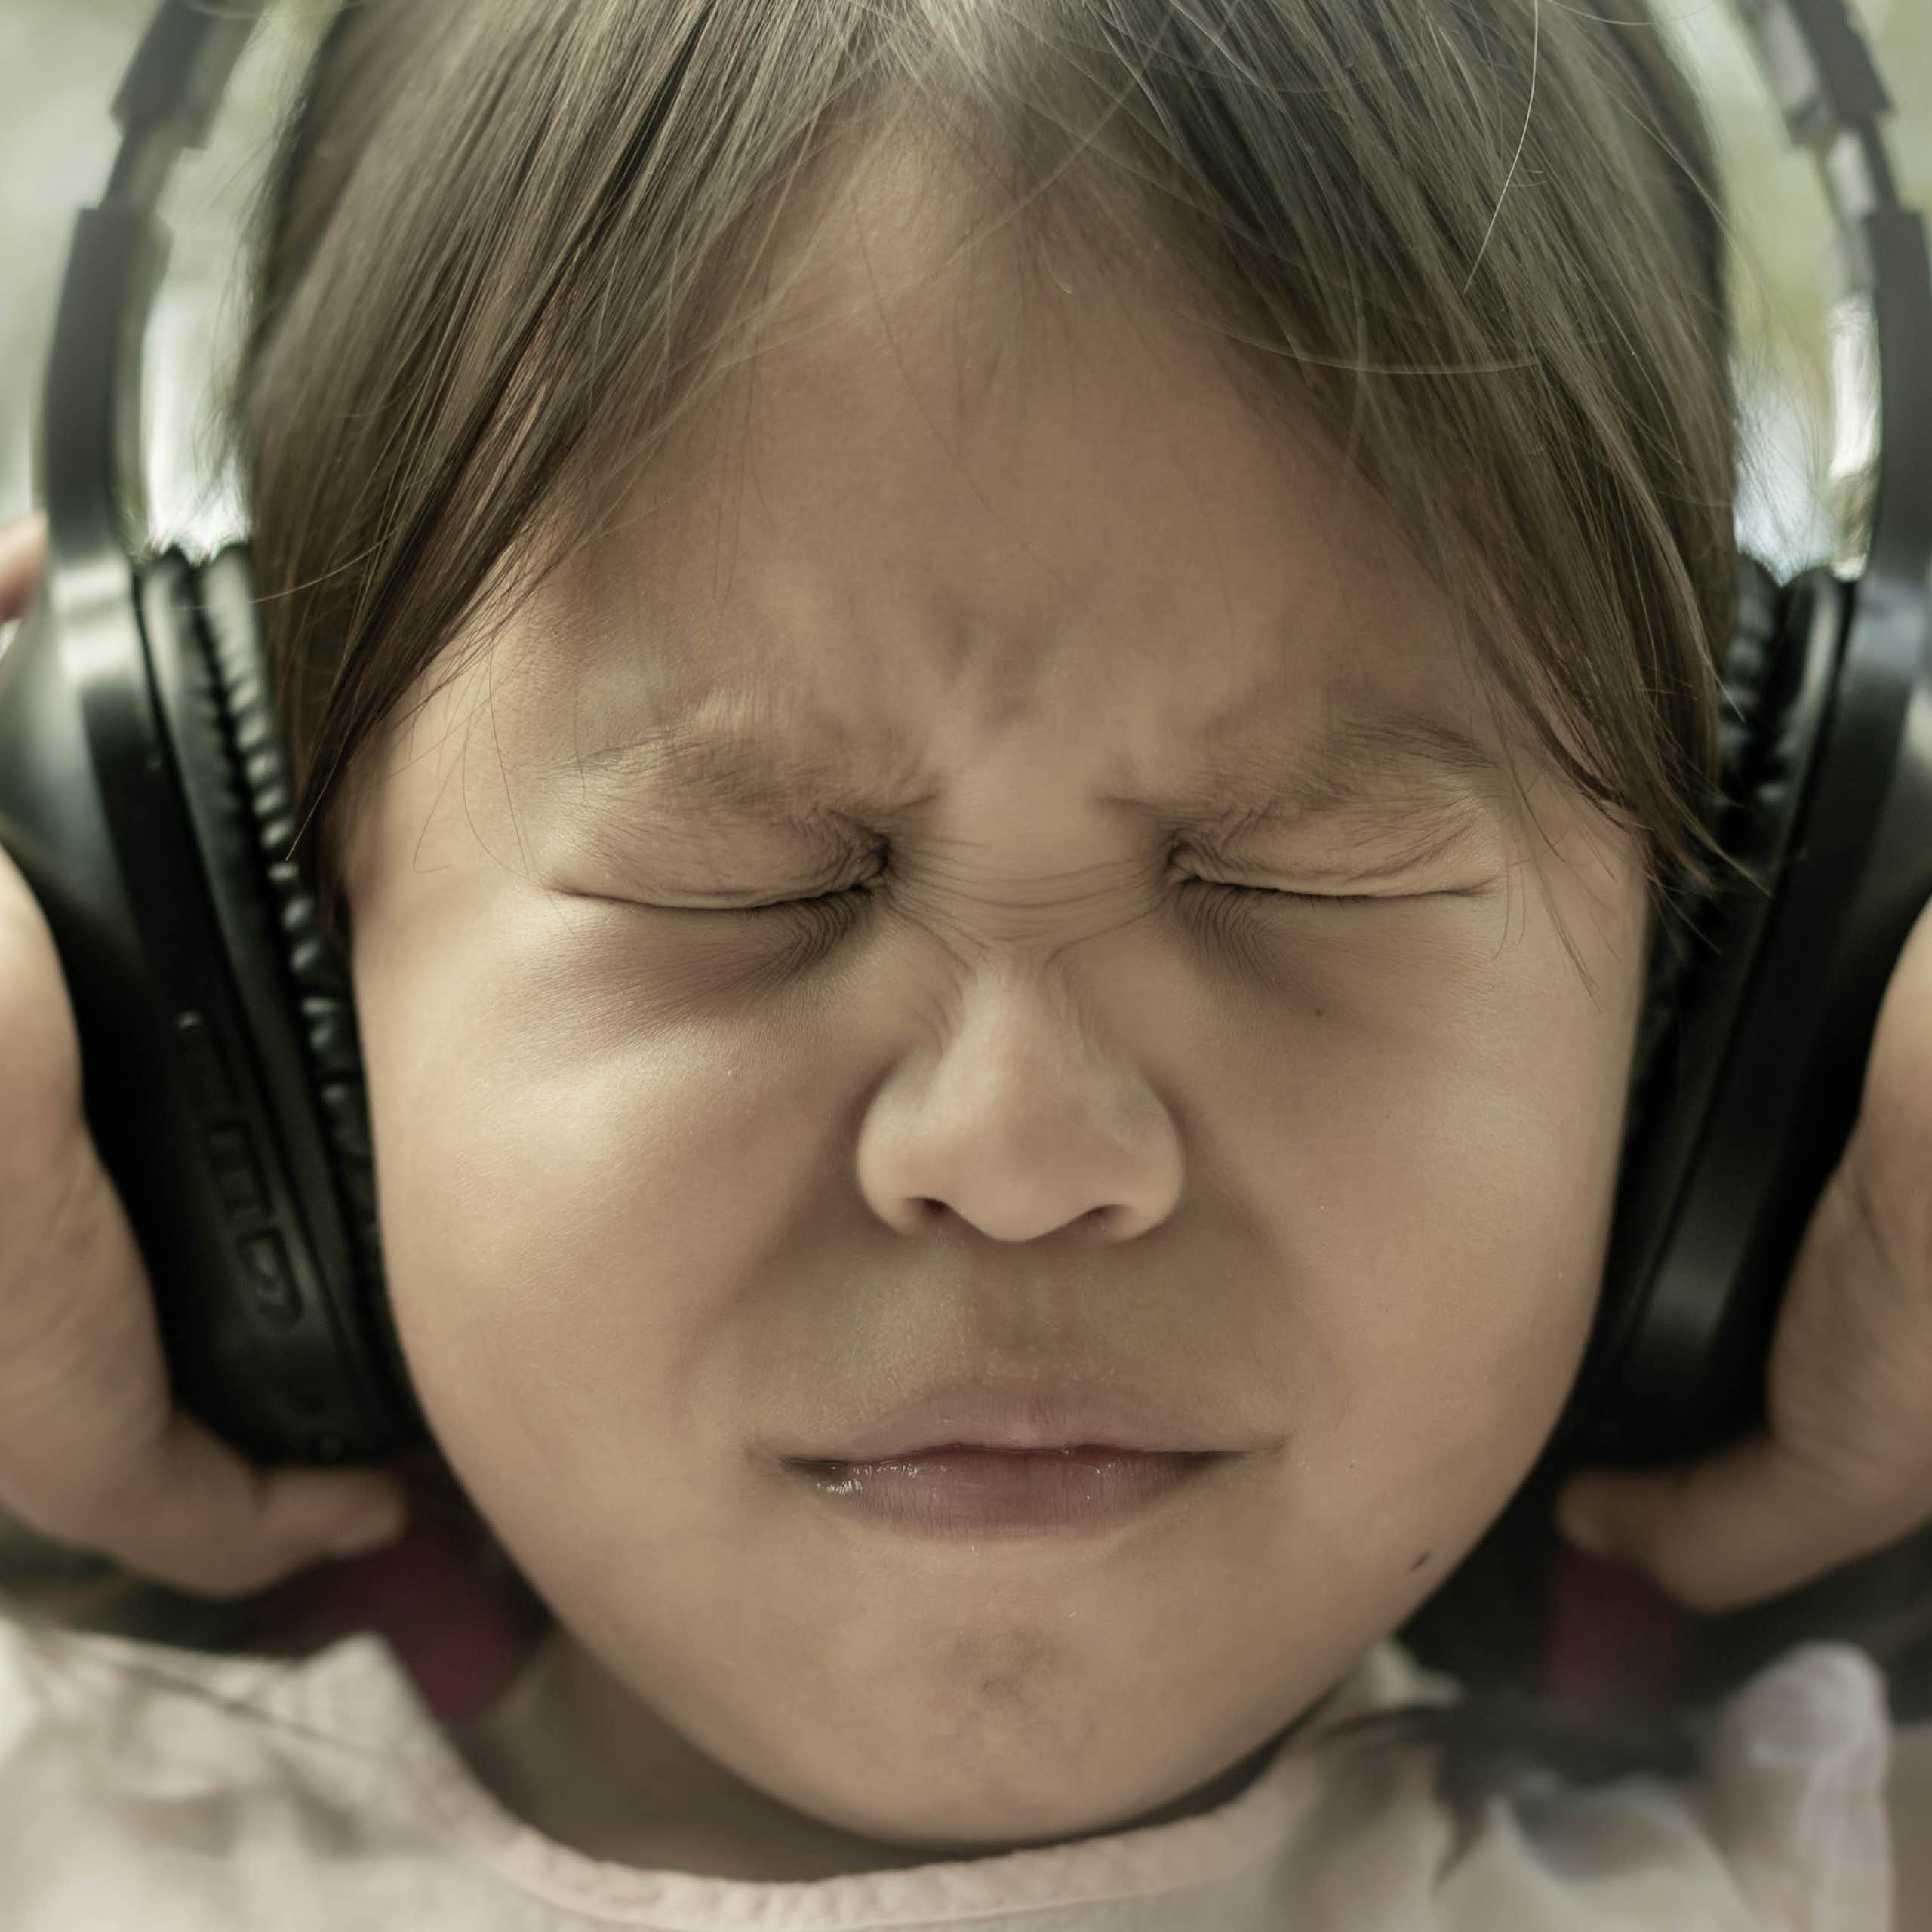 girl shuts eyes tightly and pushes headphones against ears